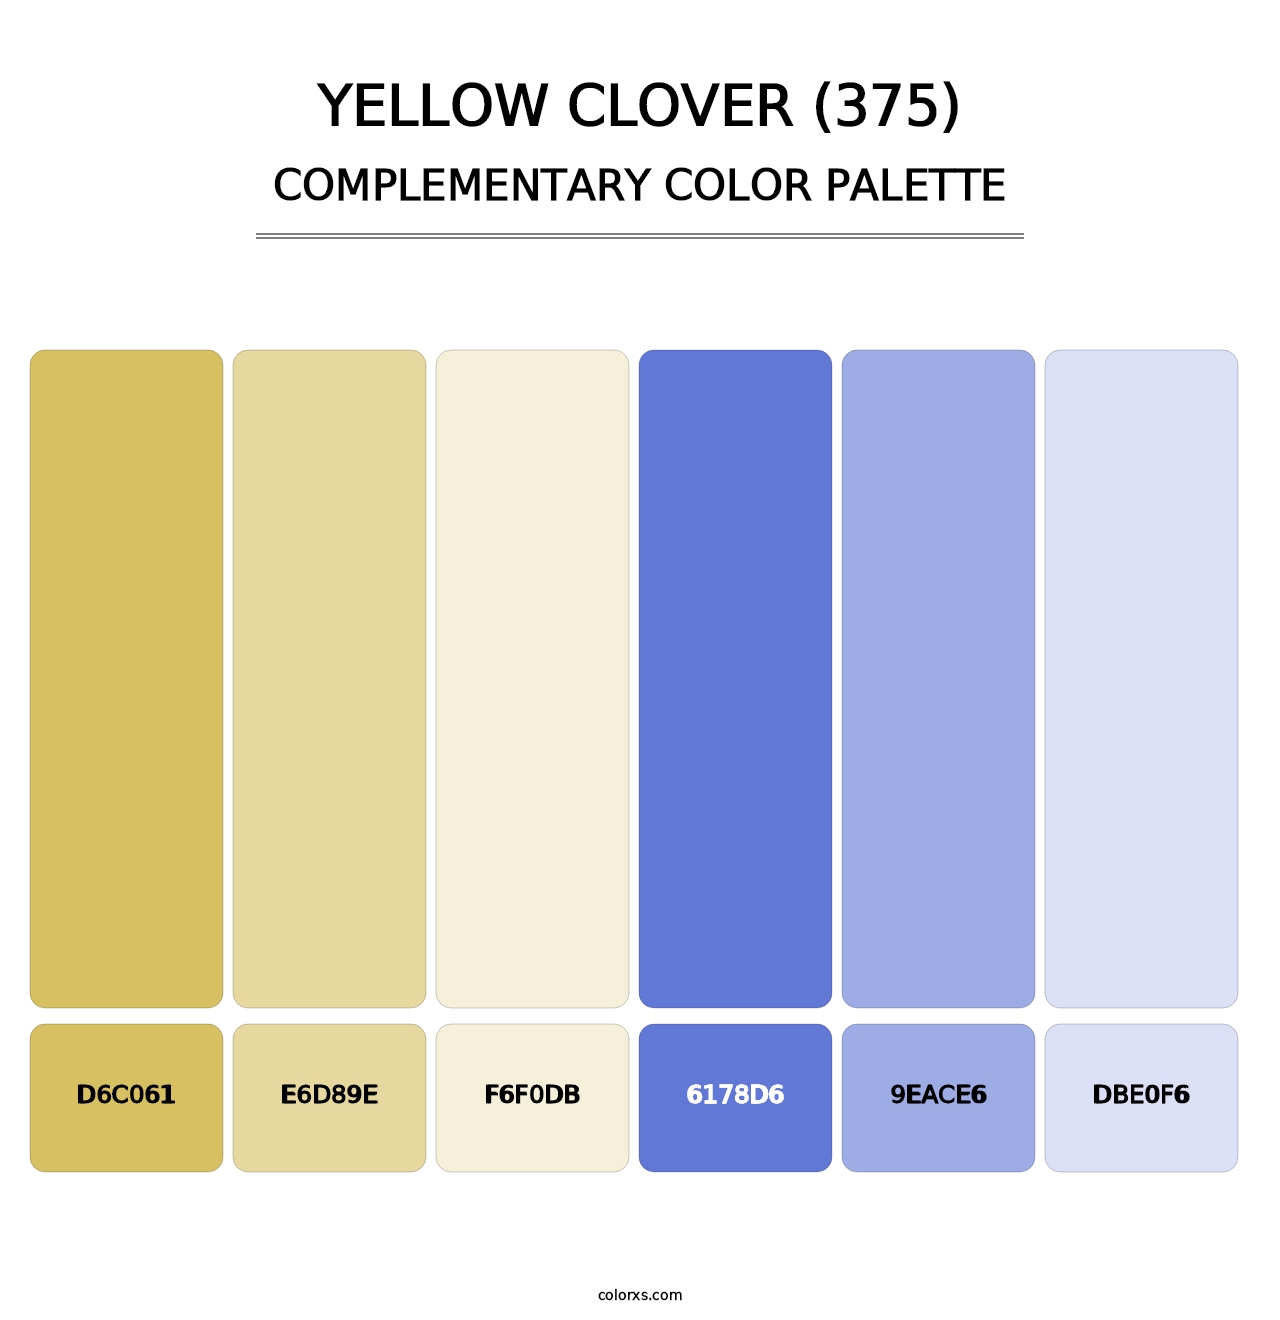 Yellow Clover (375) - Complementary Color Palette